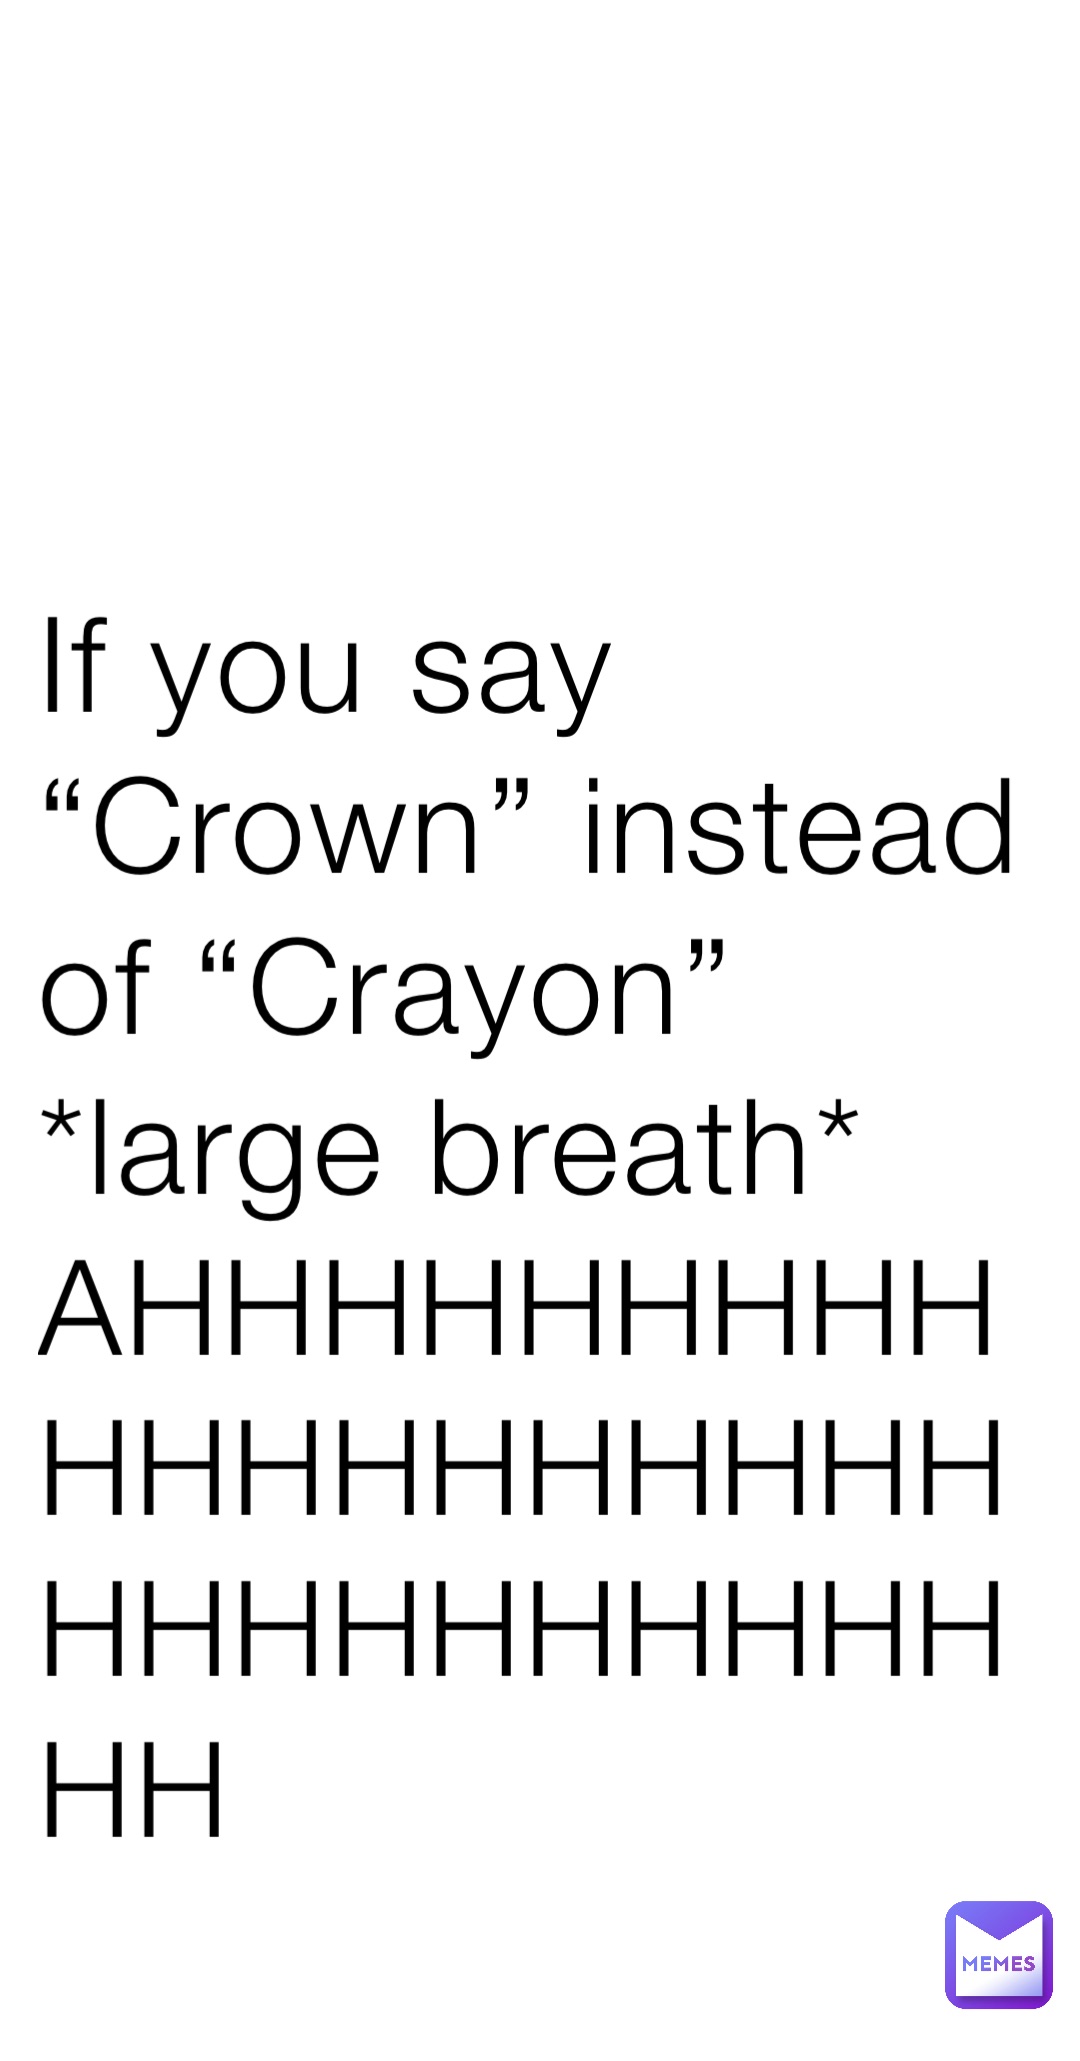 If you say “Crown” instead of “Crayon”*large breath* AHHHHHHHHHHHHHHHHHHHHHHHHHHHHHHH